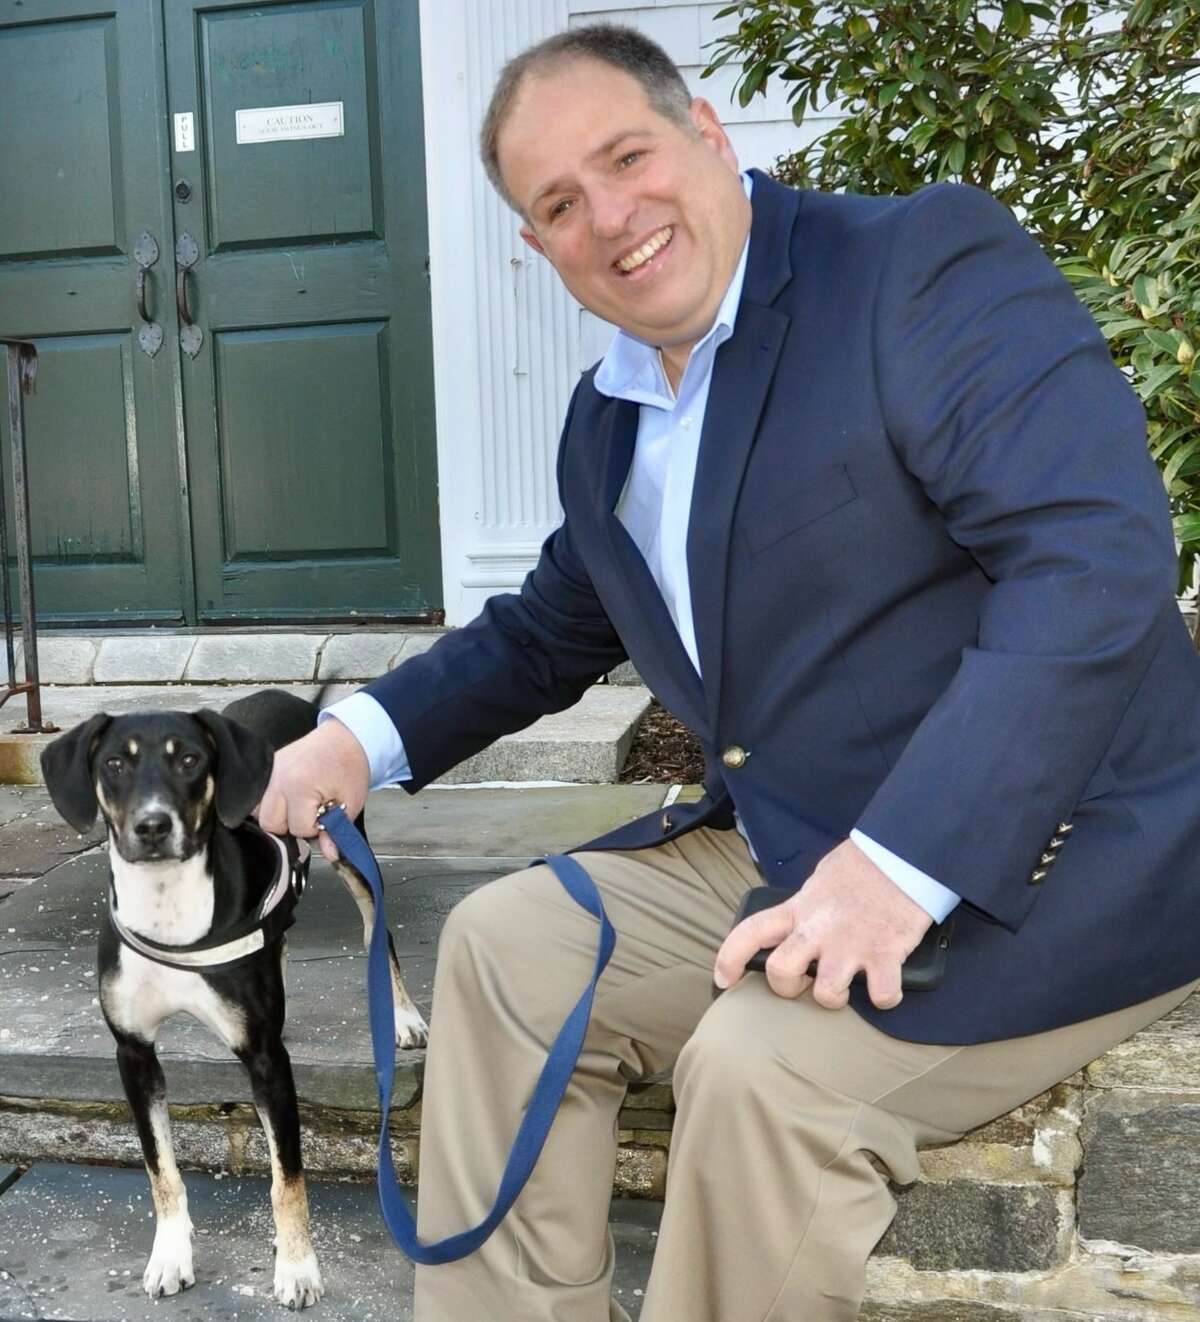 Bill Gerber, the Democratic candidate for Fairfield First Selectman, and his dog, Zelly.